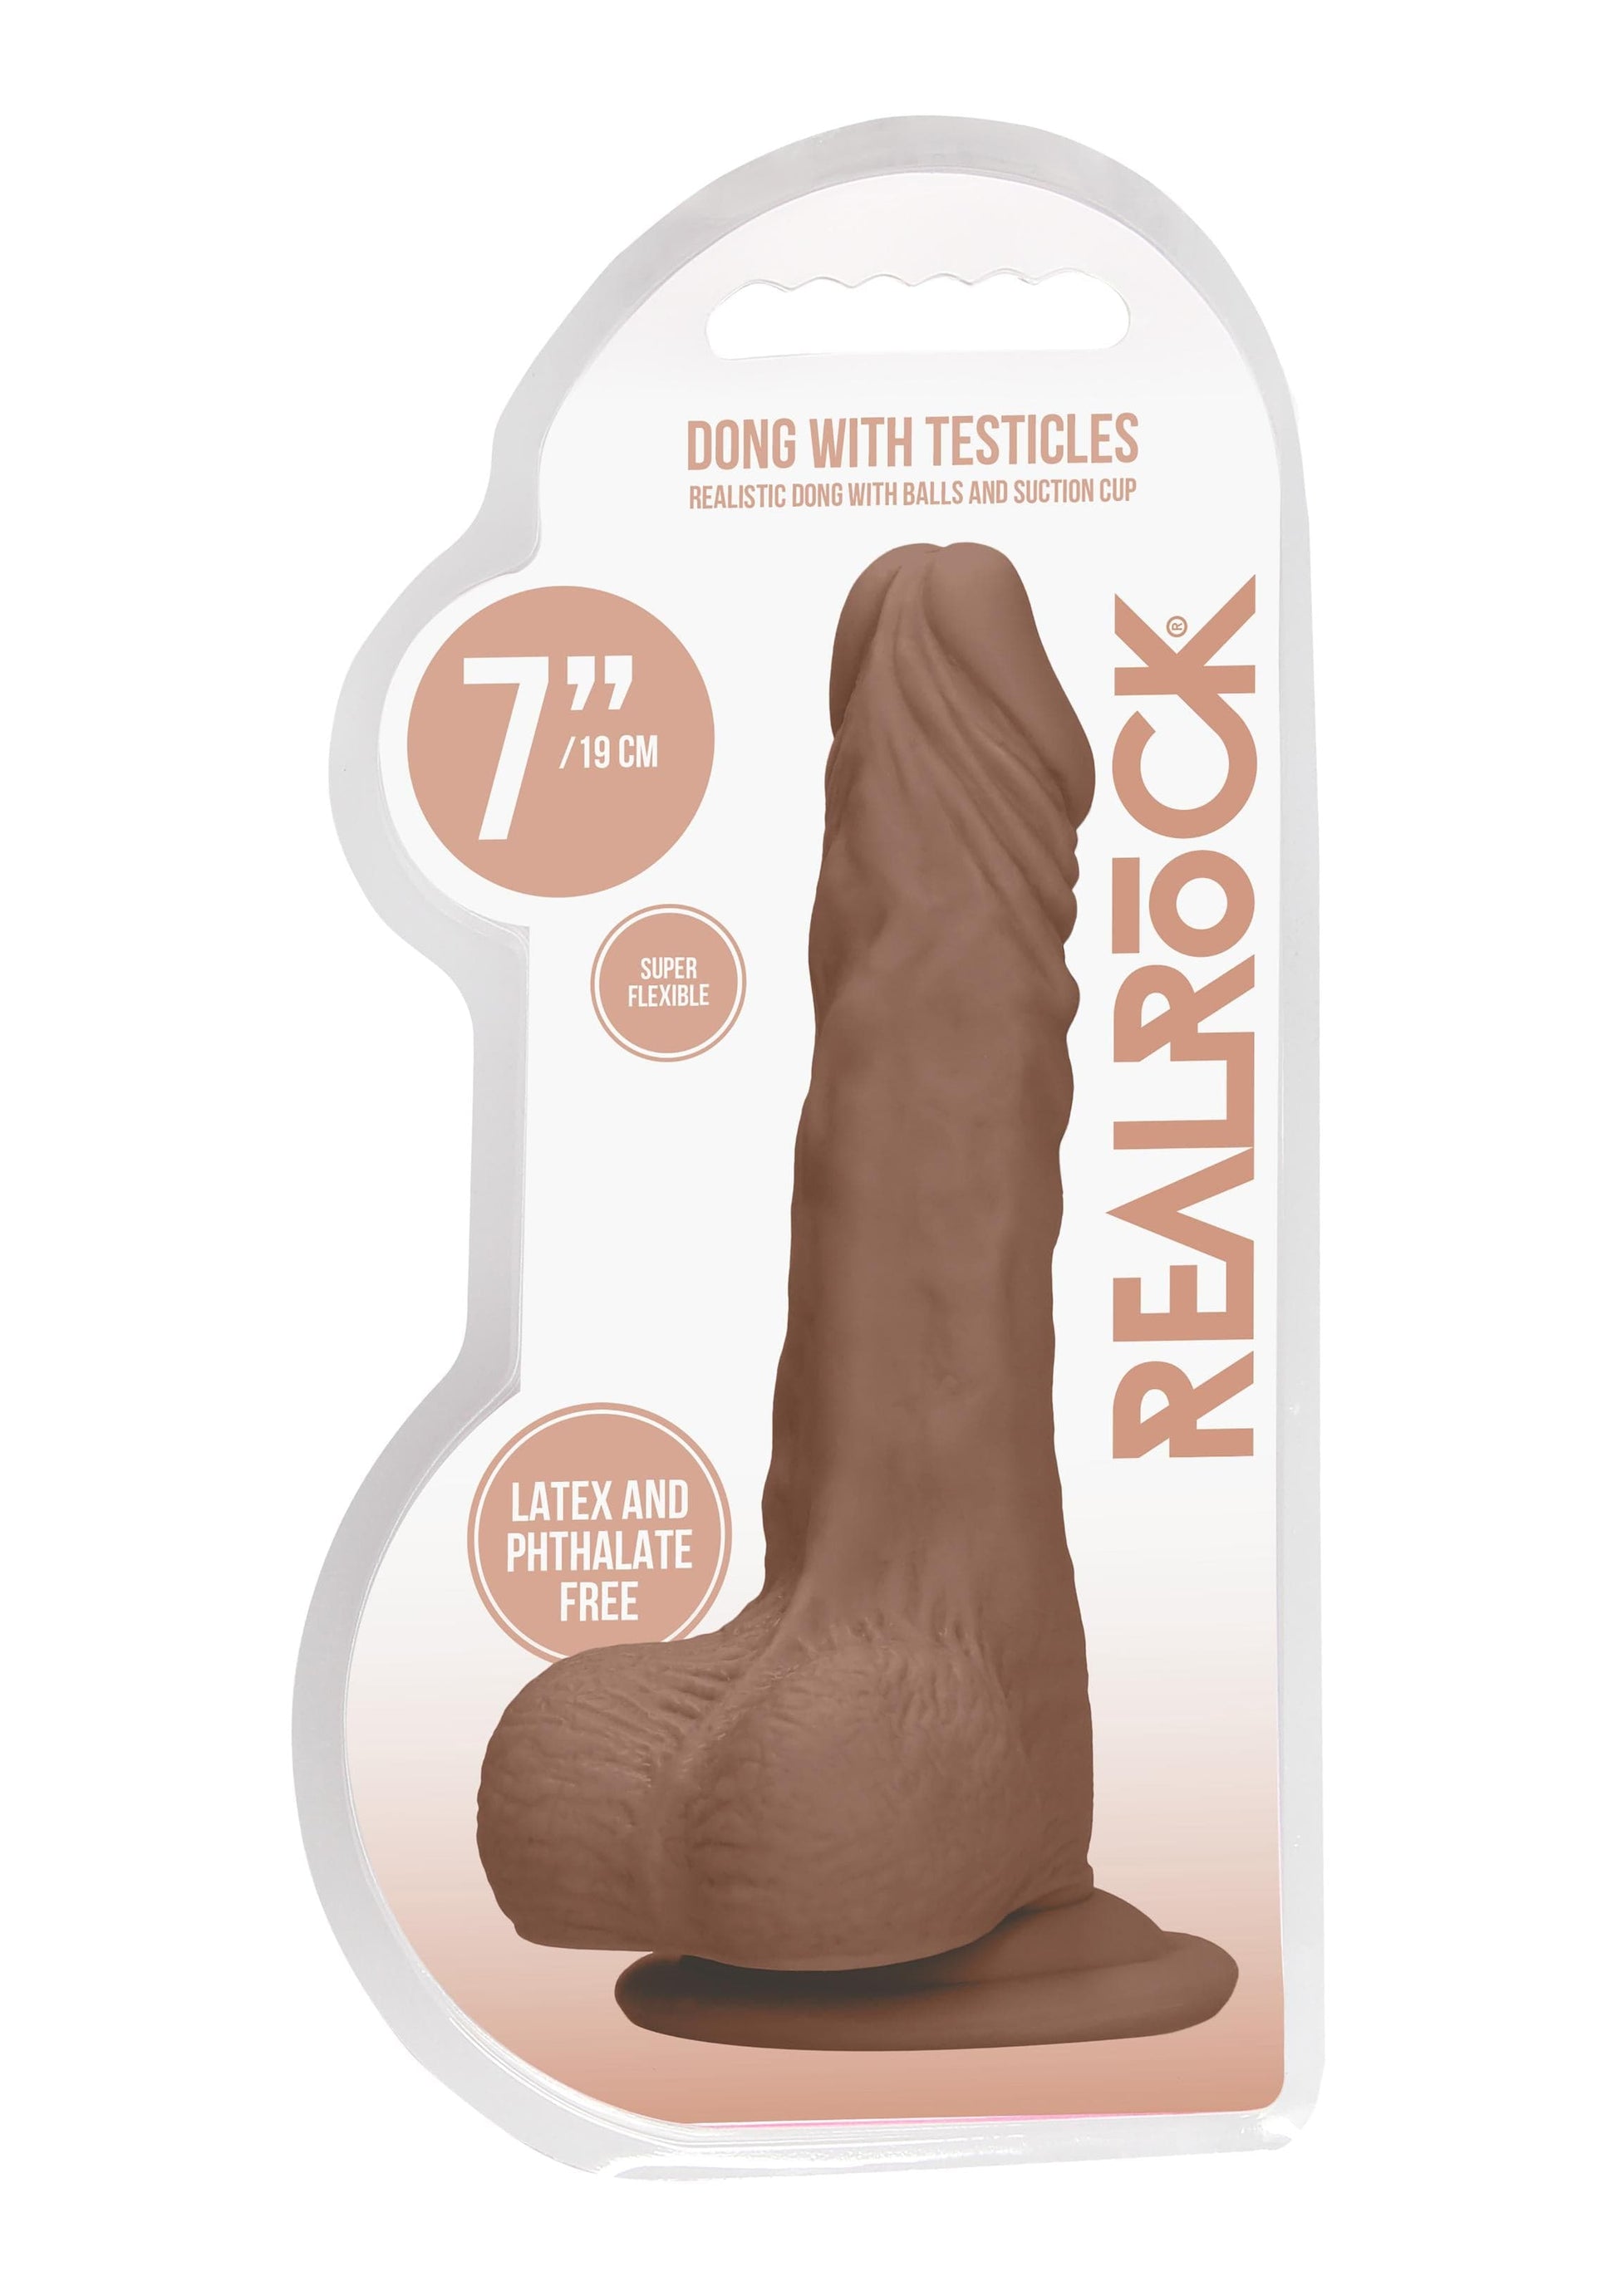 7 inch dong with testicles tan